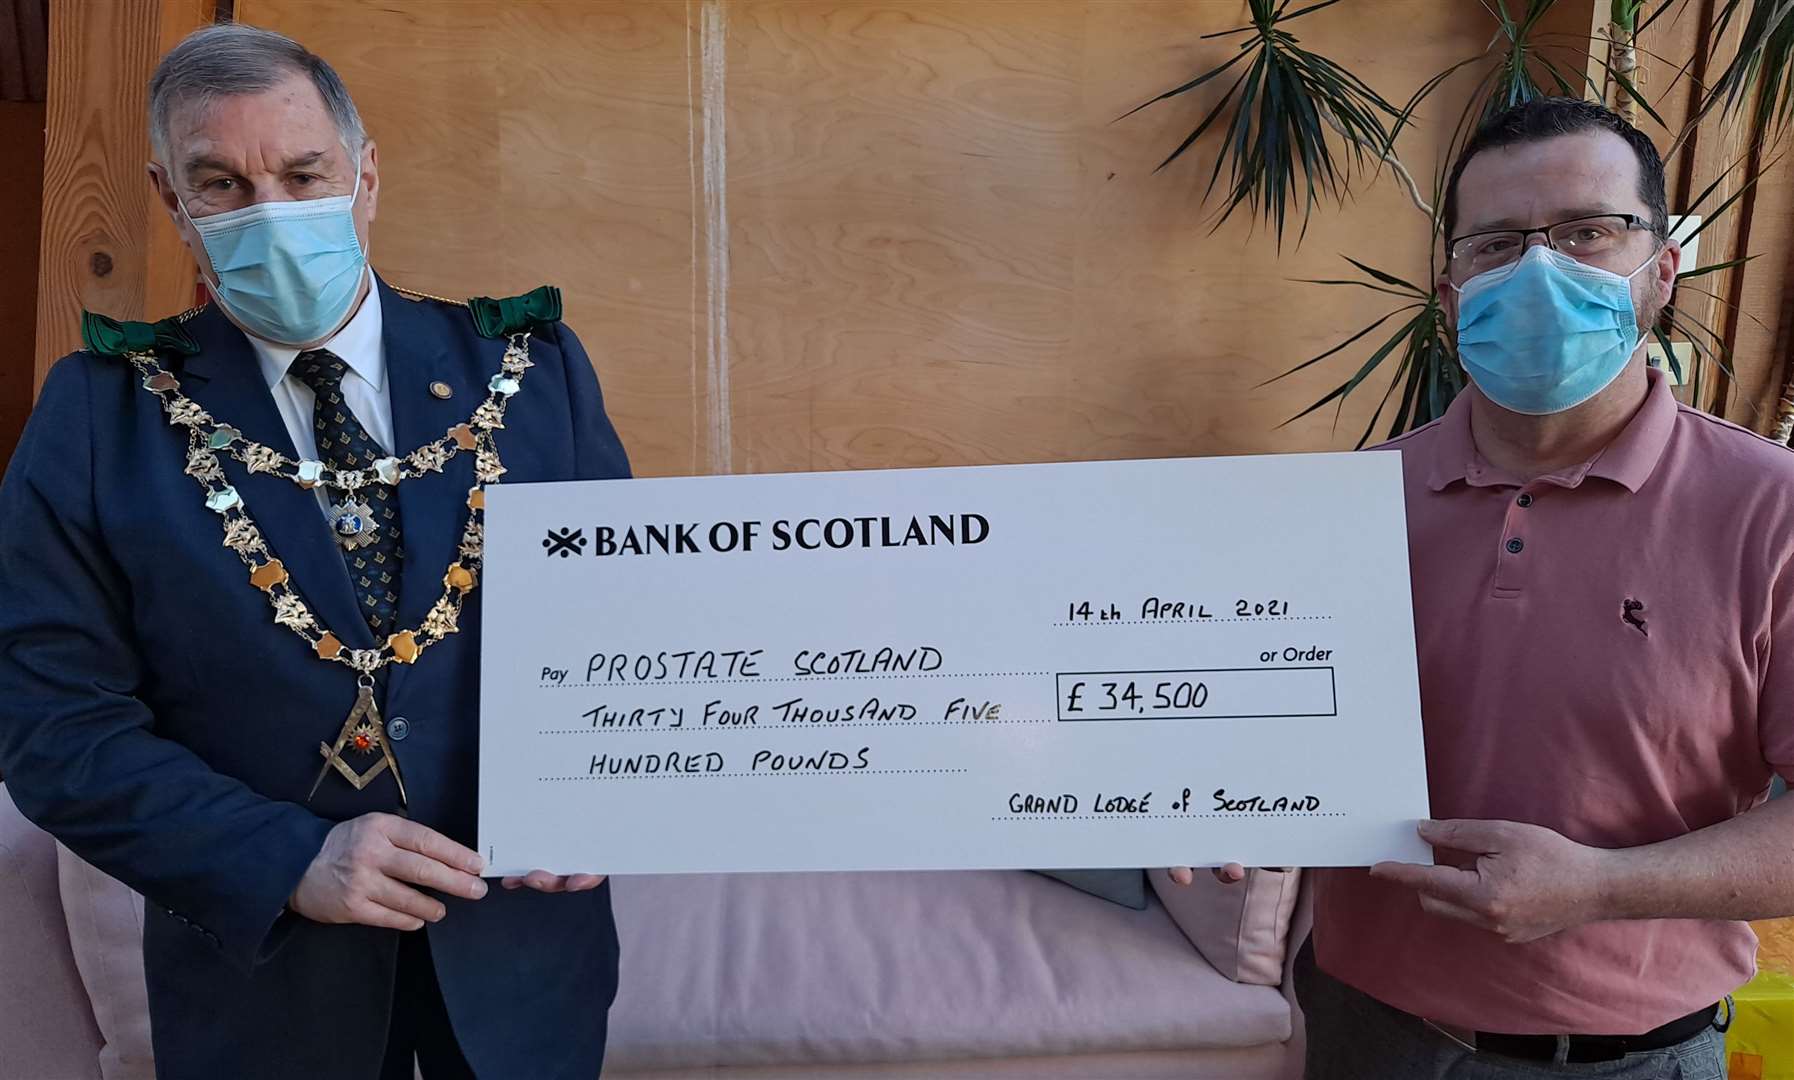 Ramsay McGhee presents a cheque for £34.500 to Brian Corr, a member of Prostate Scotland’s medical advisory committee.